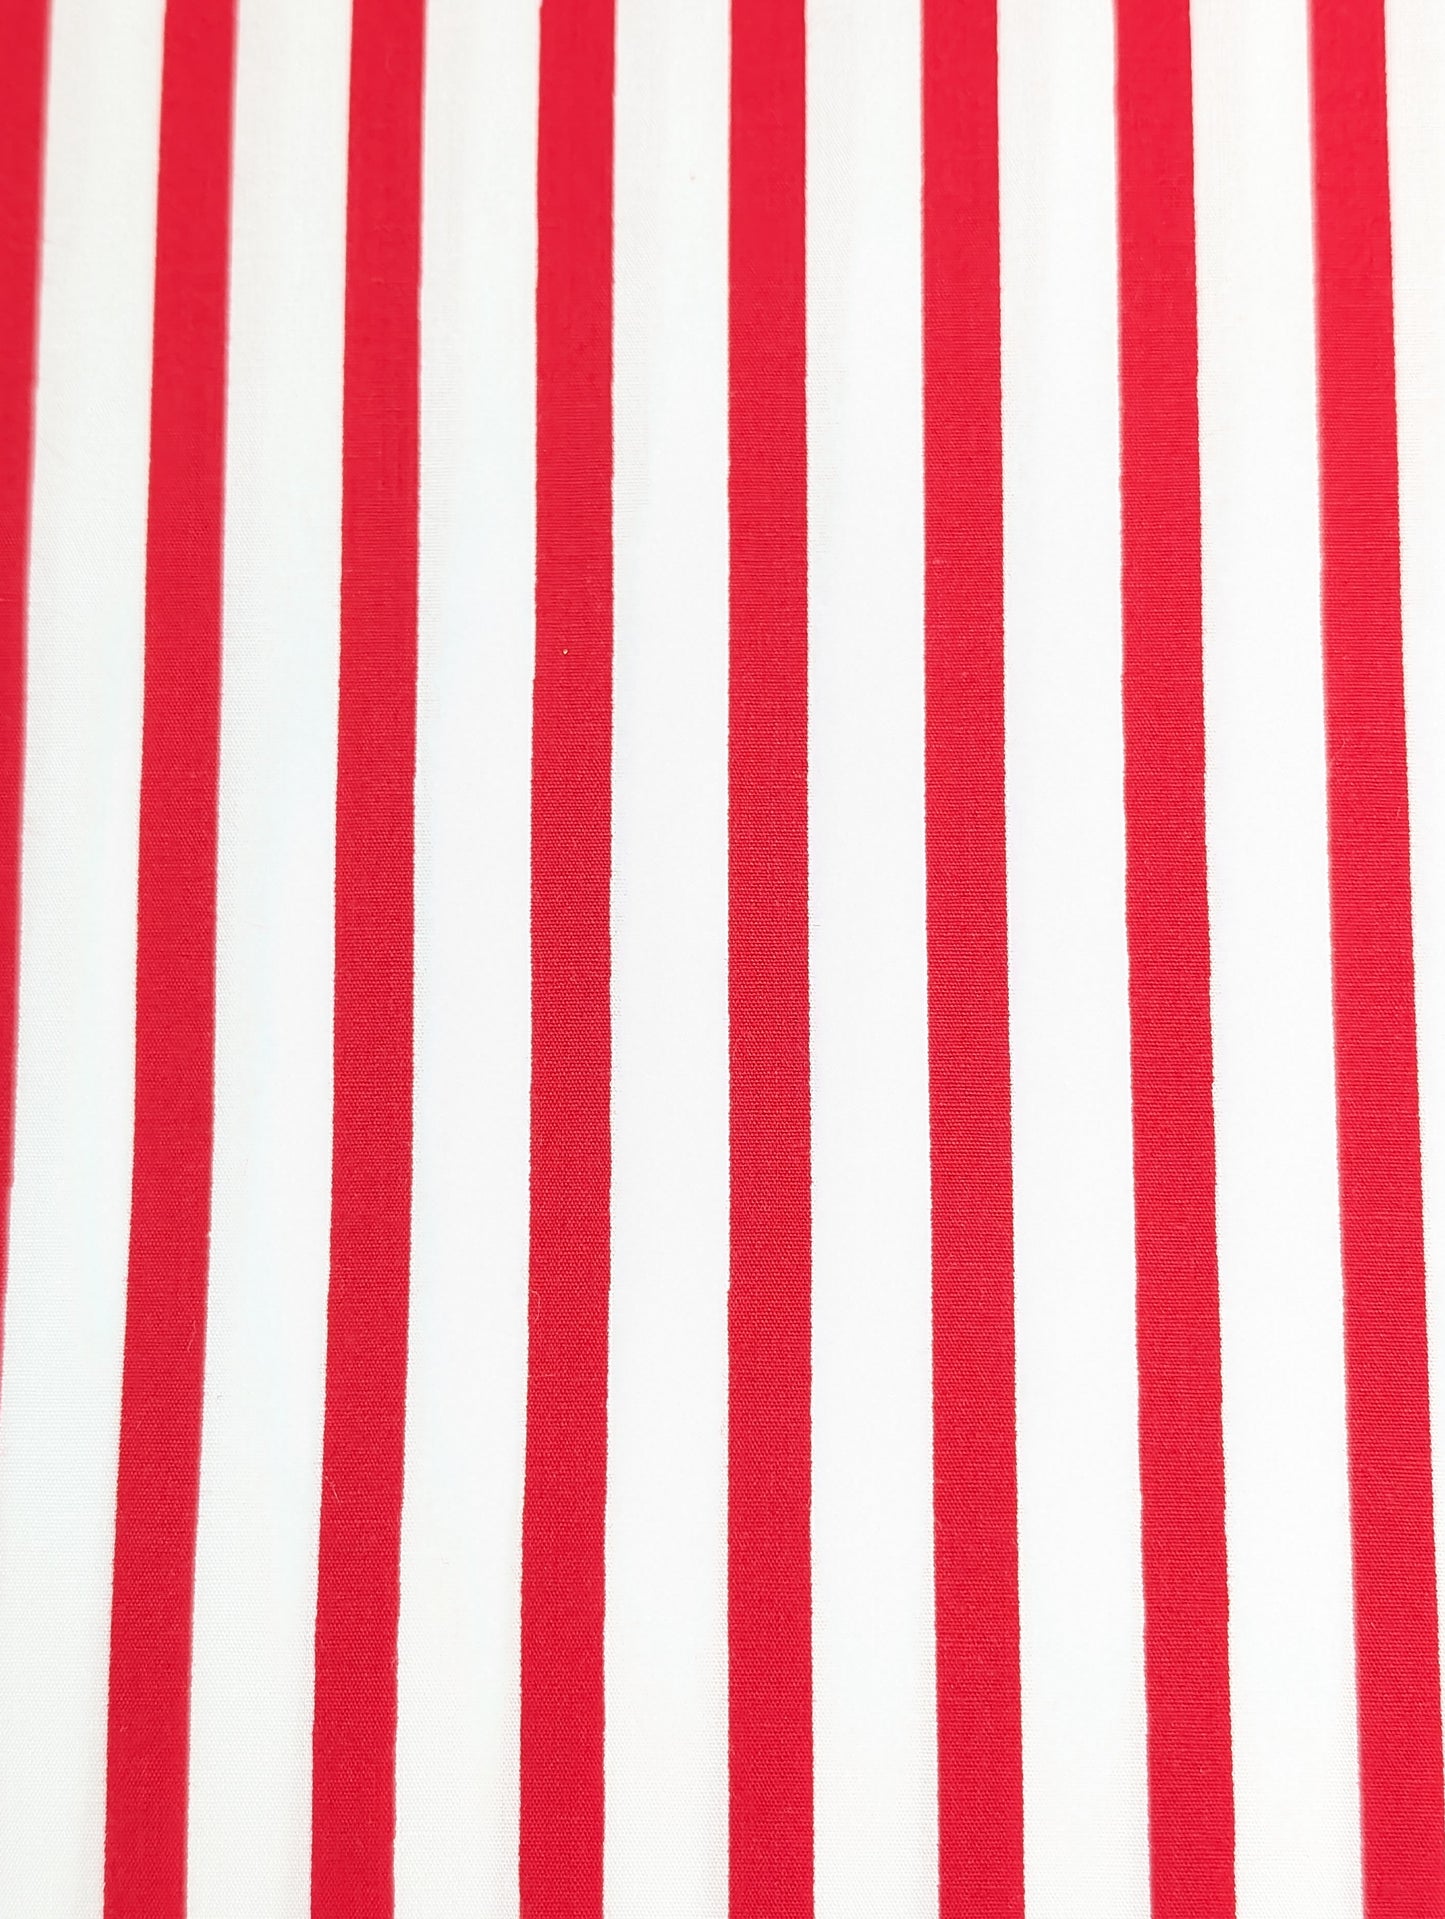 100% Cotton Red/White Striped Shirting